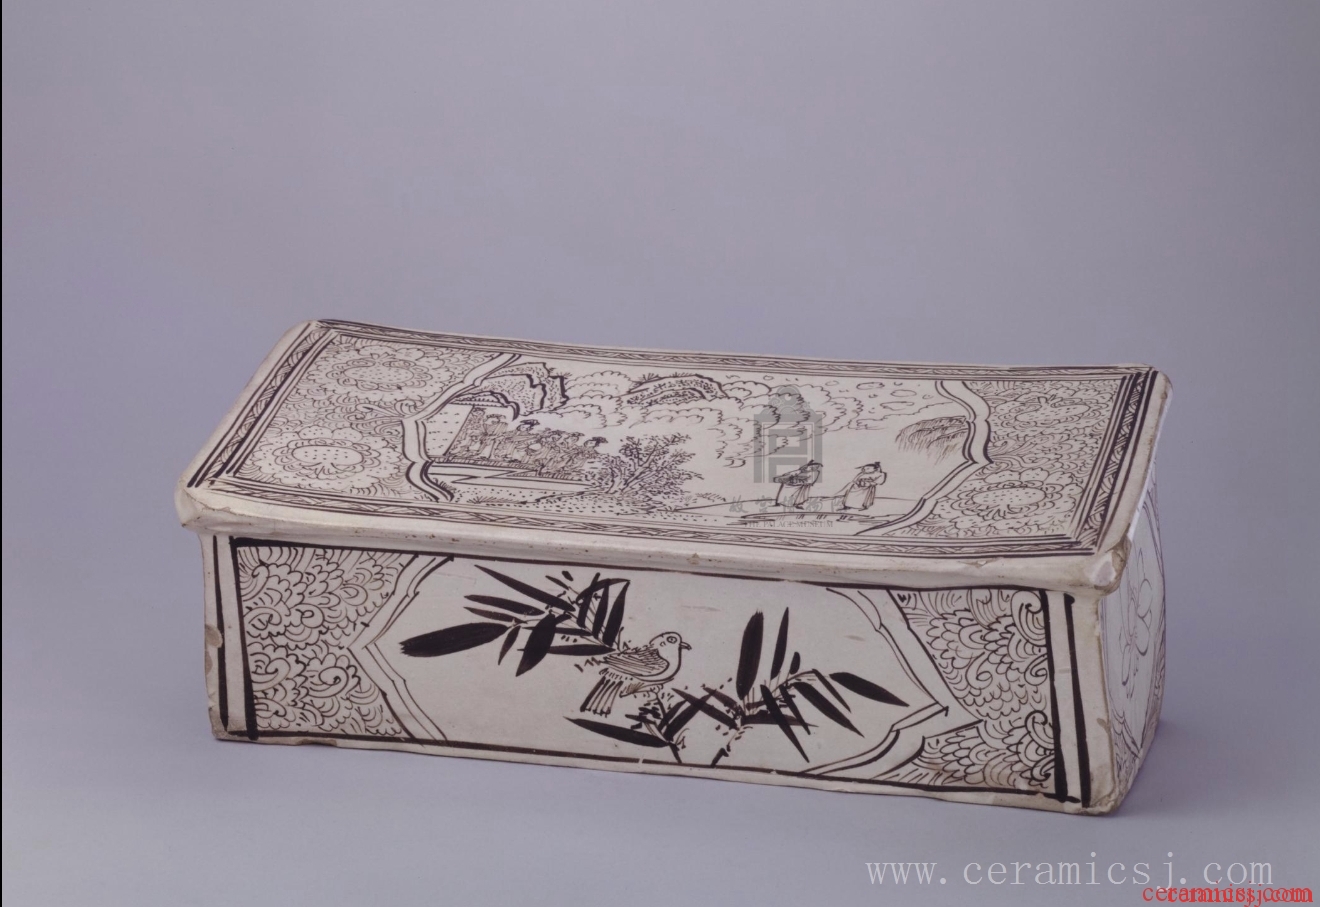 Pillow with Black Figures on a White Ground, Cizhou Ware